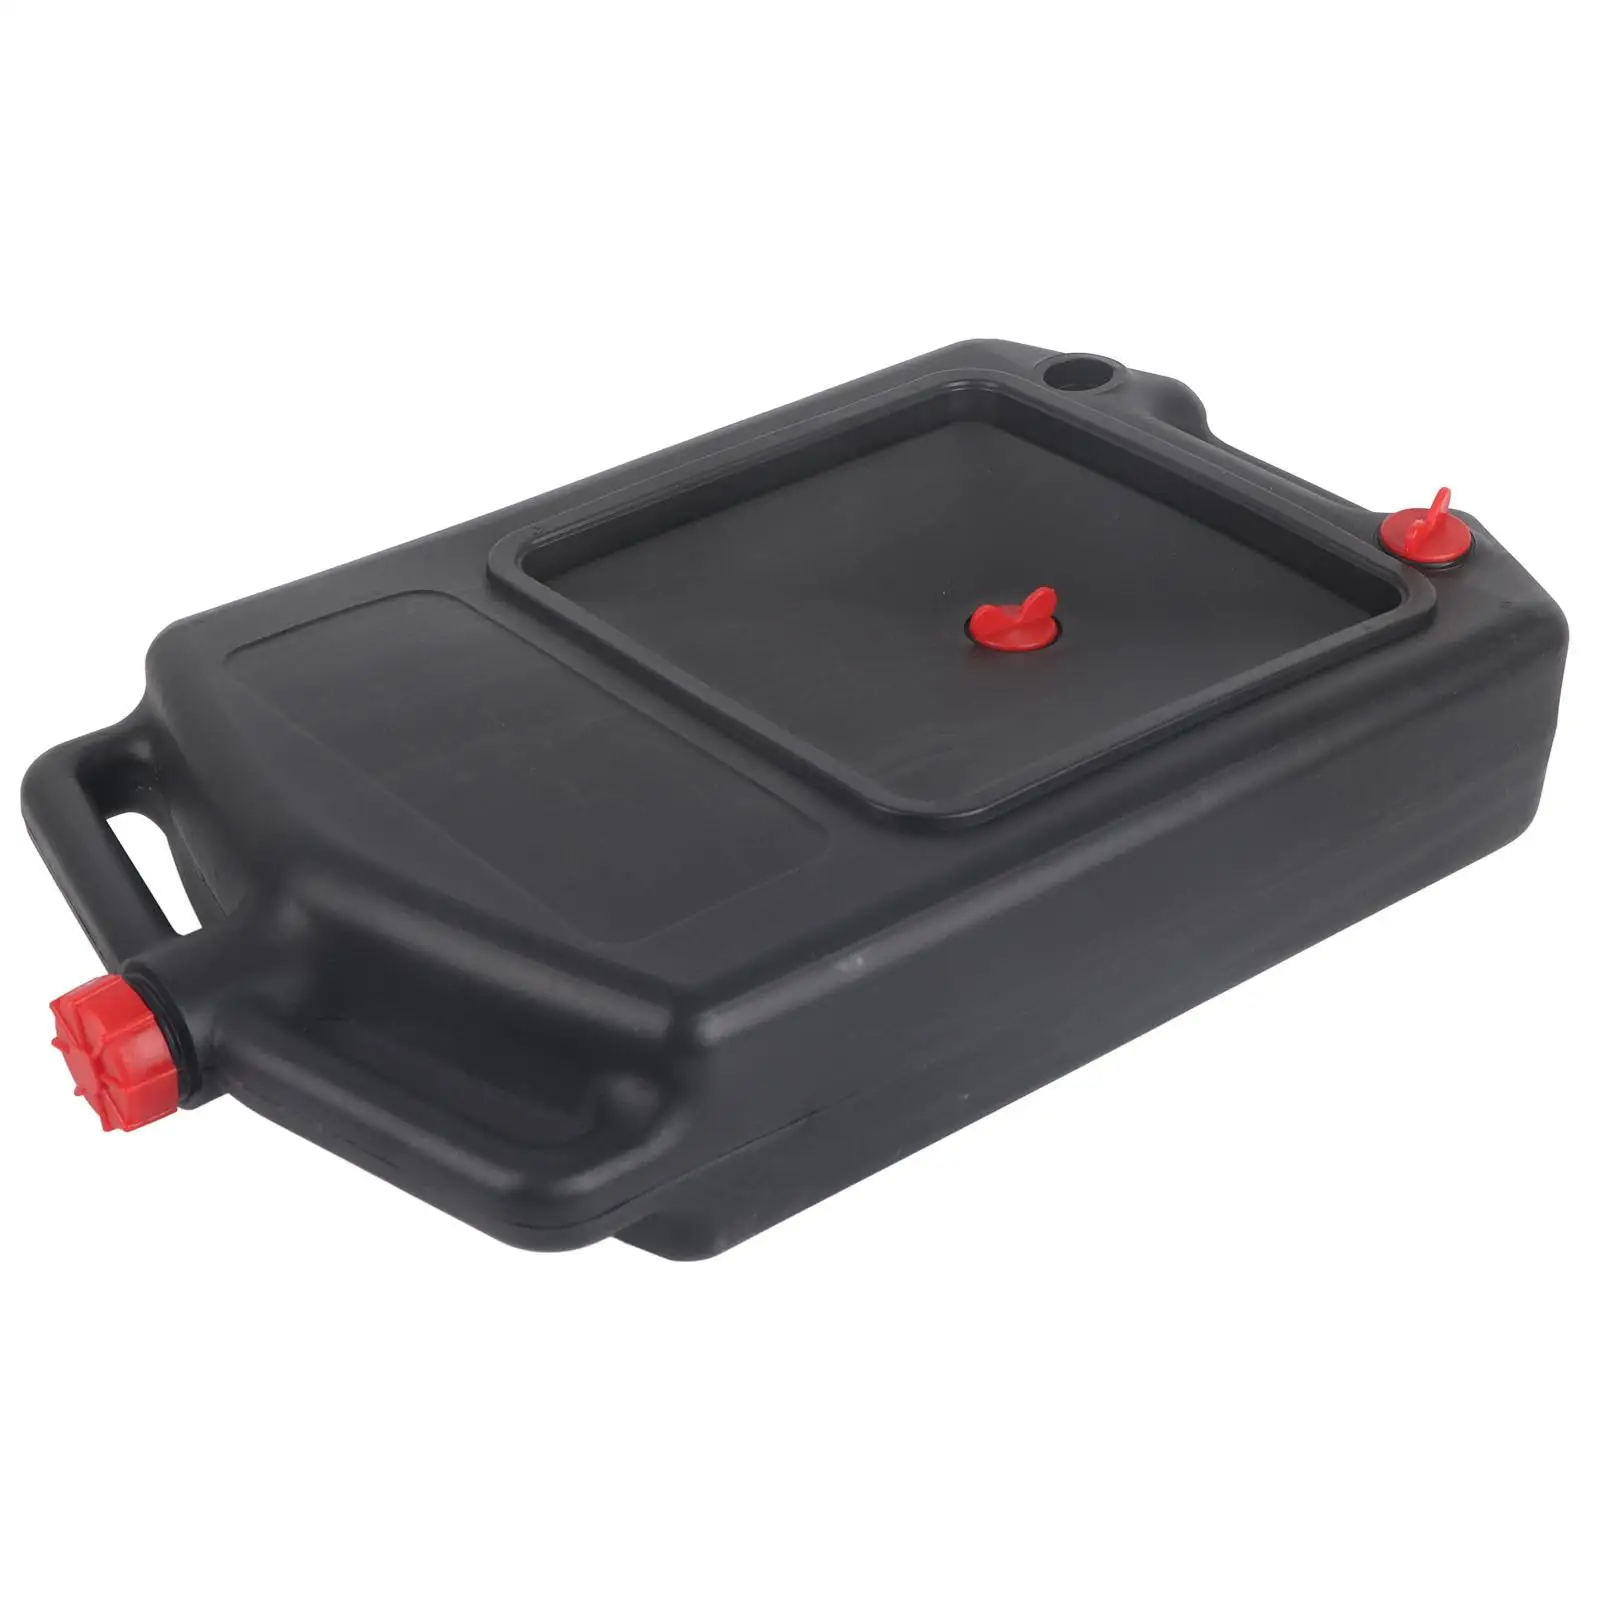 

Oil Drain Pan Resistant To Most Solvents Oil Drain Tray for car Motorcycle